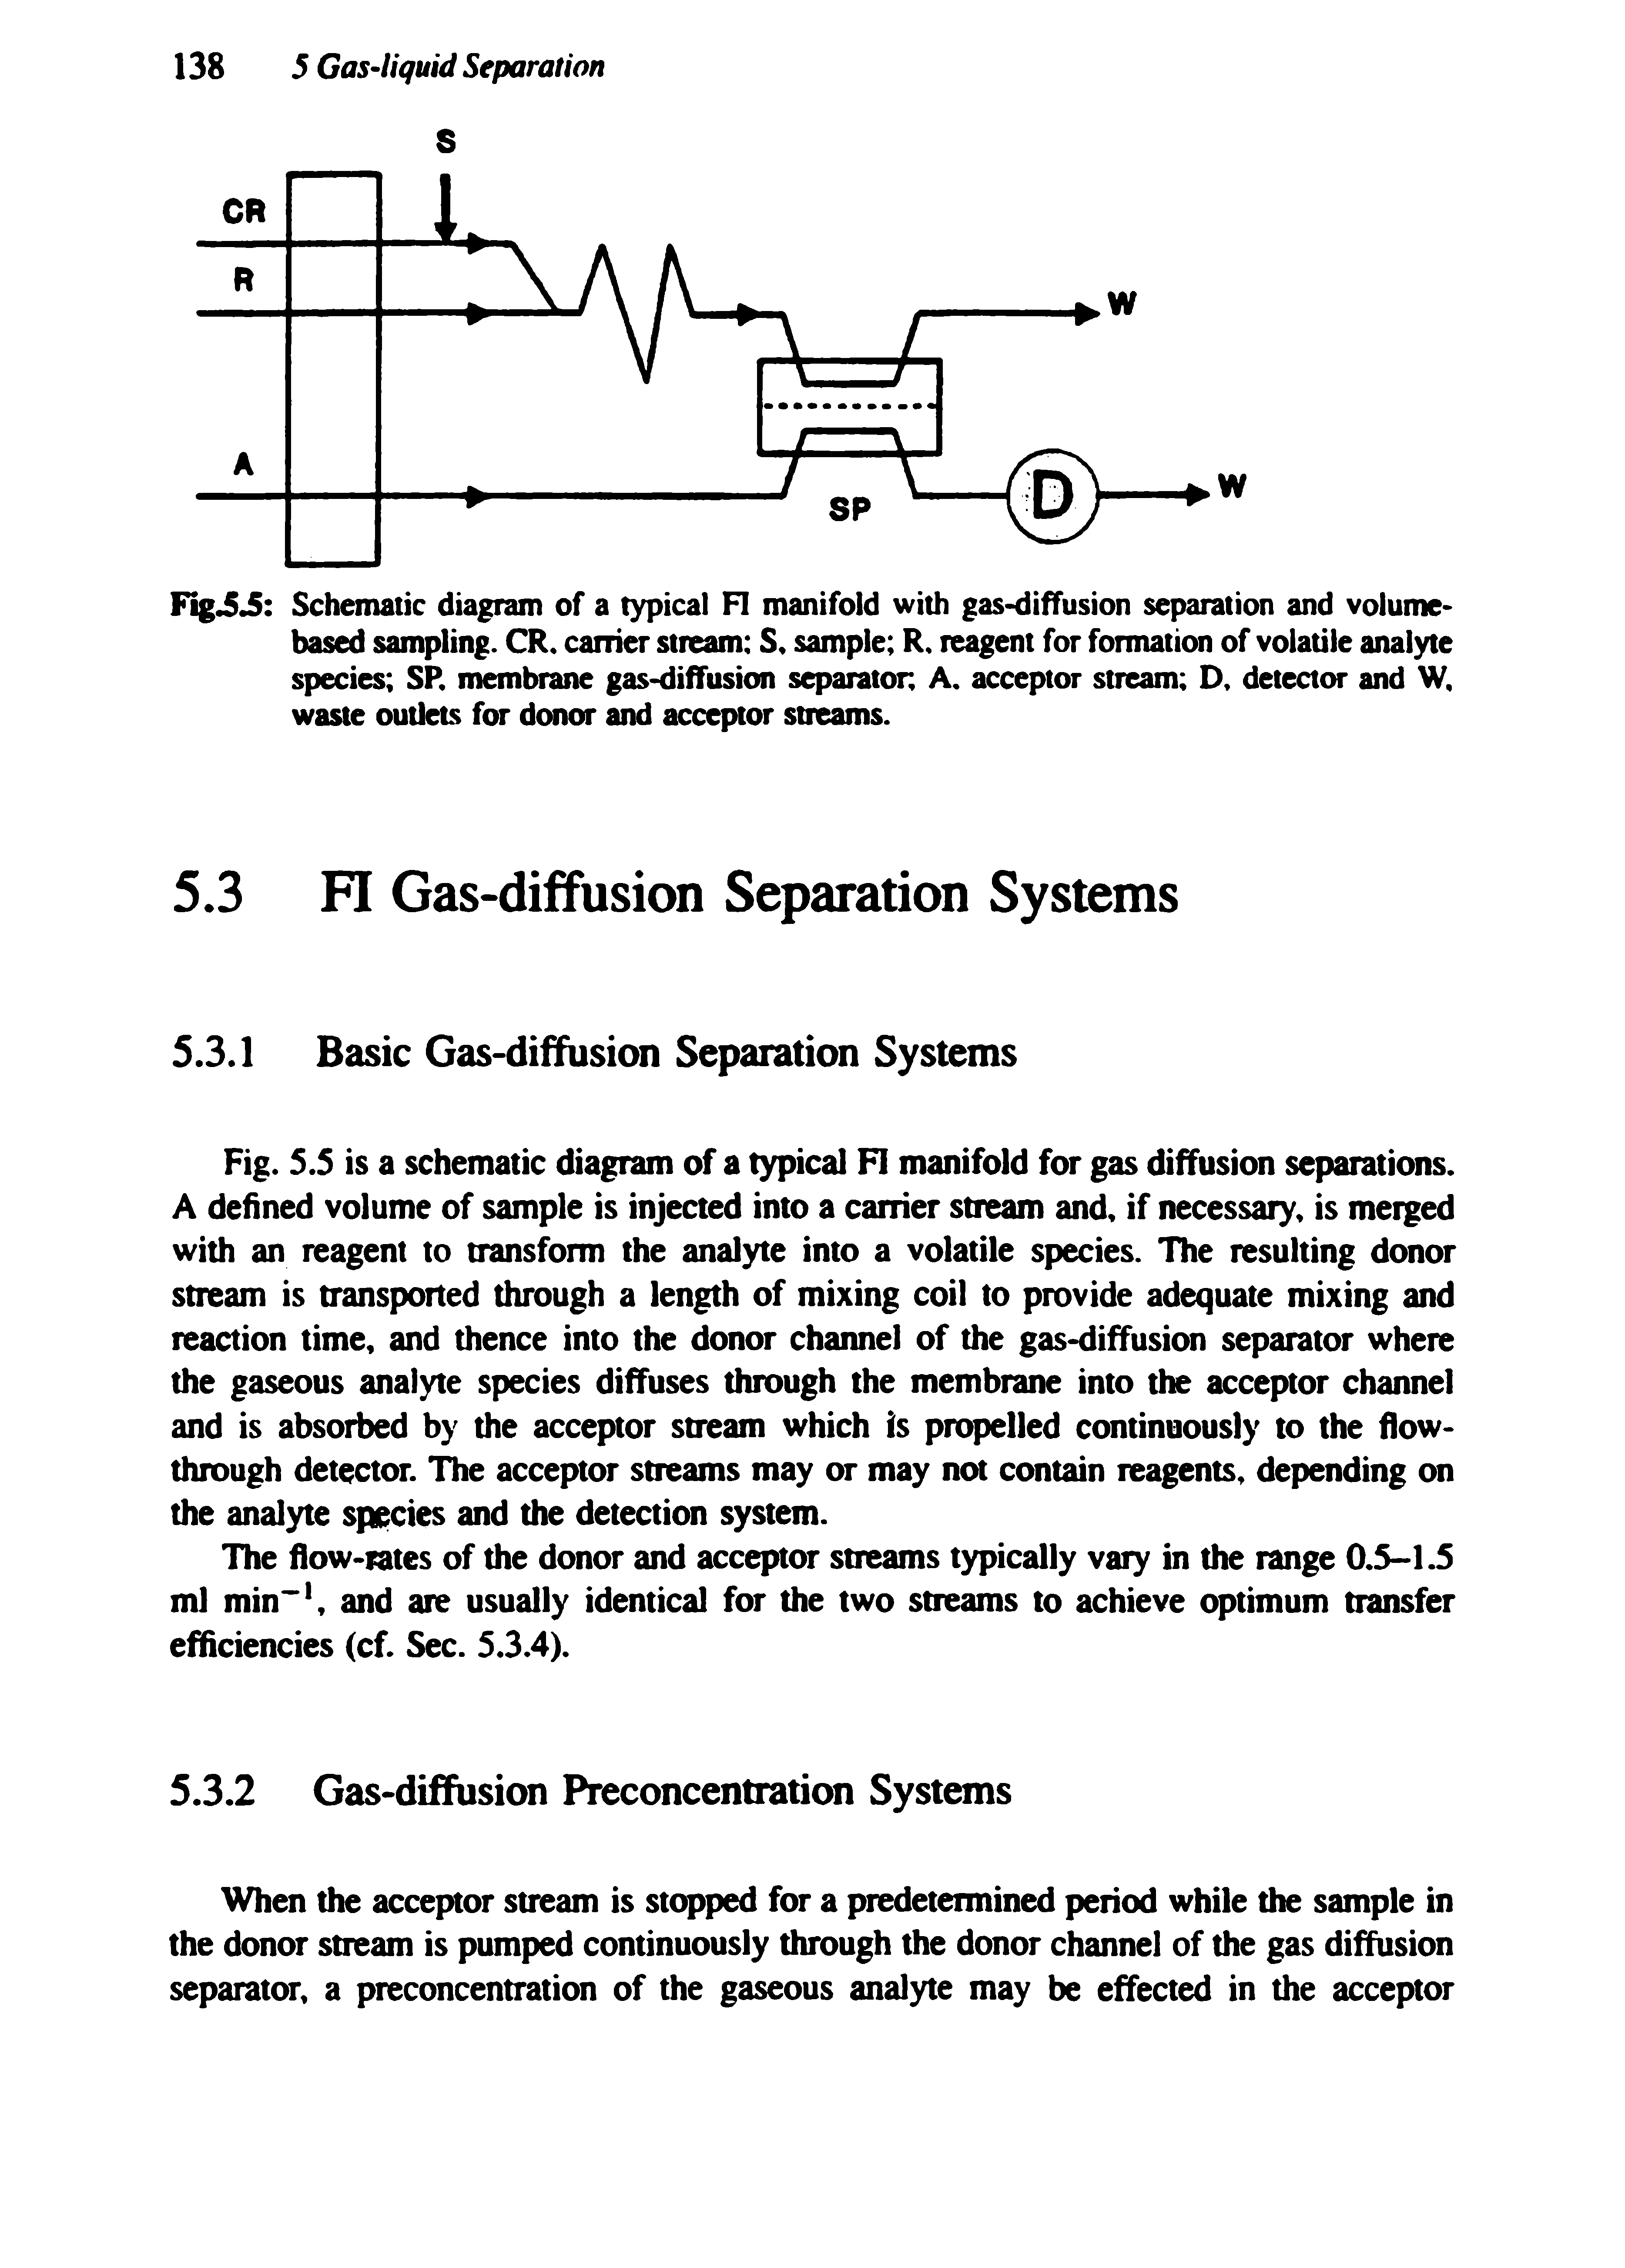 Fig. 5 Schematic diagram of a typical FI manifold with gas-diffusion separation and volume-based sampling. CR. carrier stream S, sample R. reagent for formation of volatile analyte species SP. membrane gas-diffusion separator, A. acceptor stream D, detector and W, waste outlets for donor and acceptor streams.